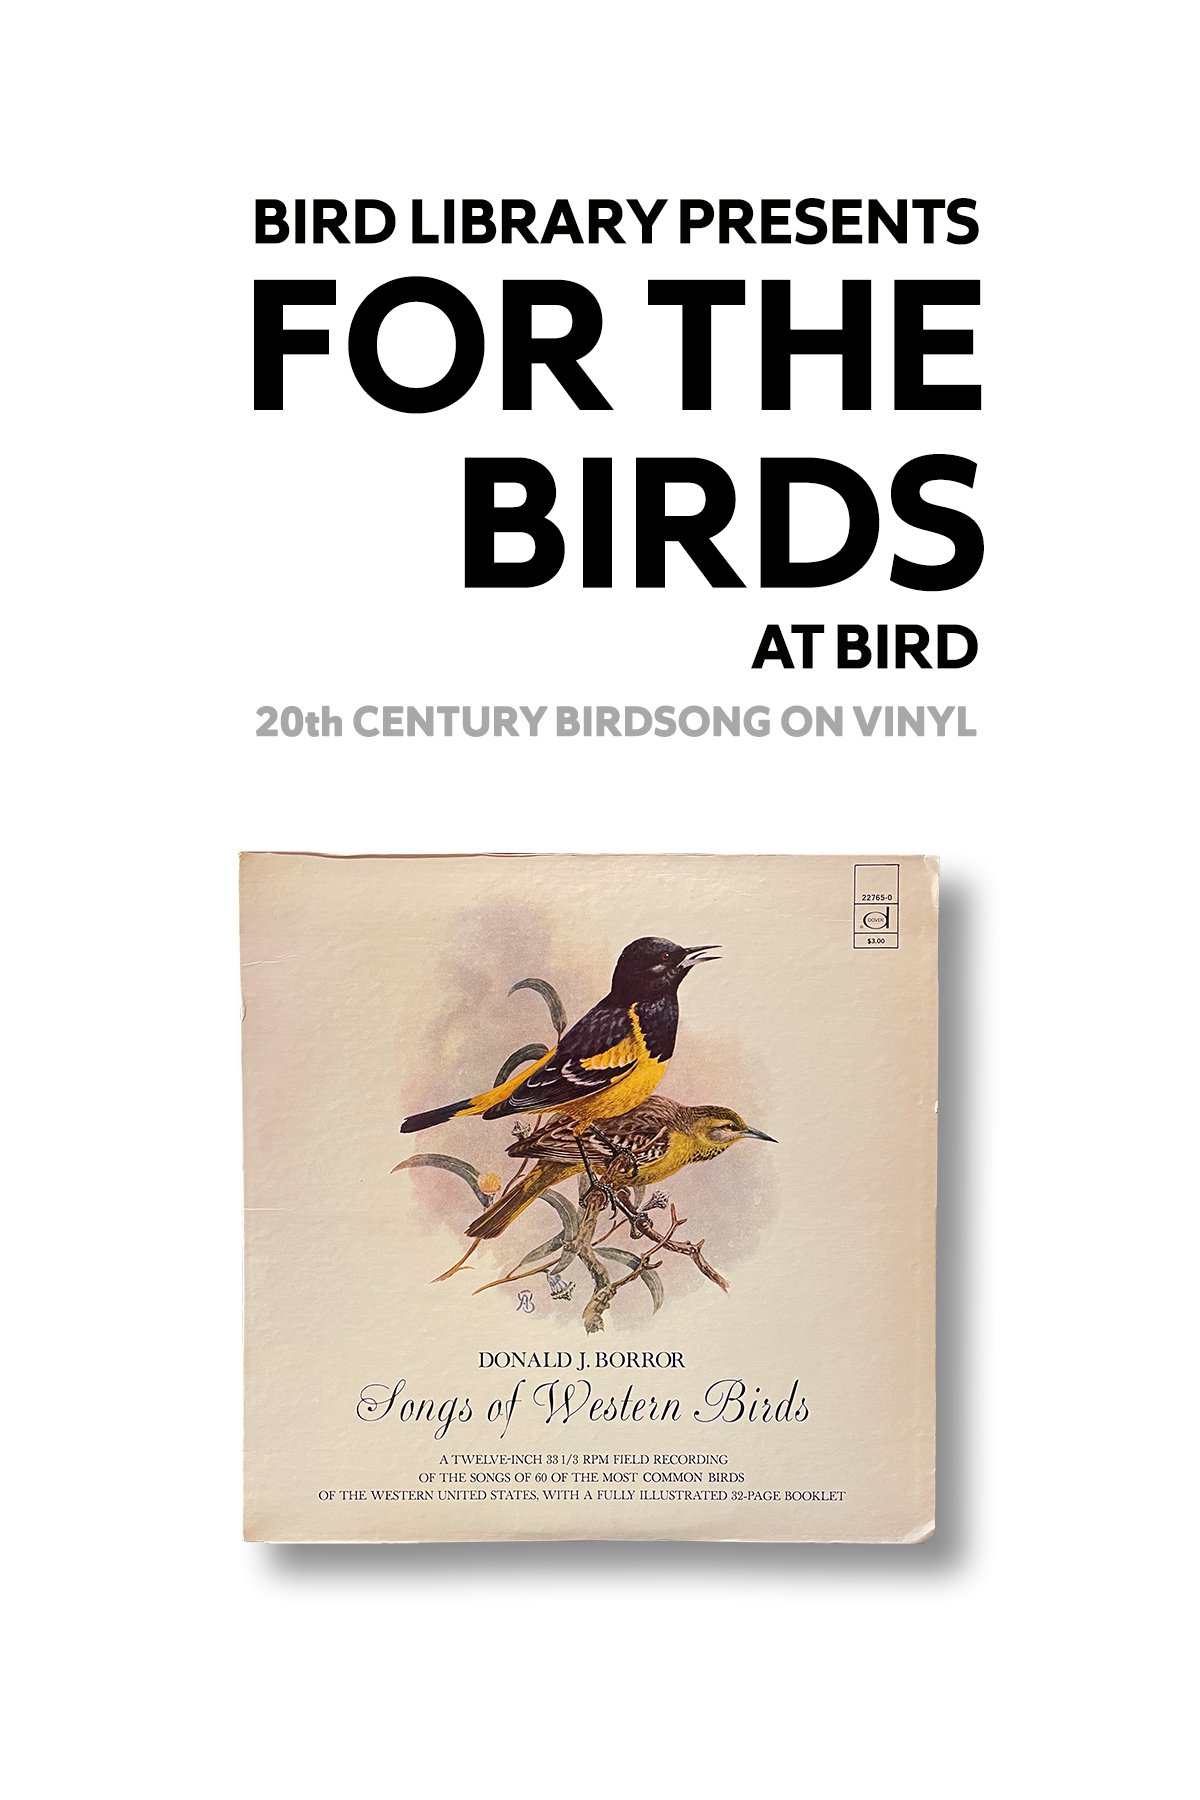 Text reads "Bird Library Presents For the Birds at Bird, 20th century birdsong on vinyl" and had album cover beneath with illustration of two birds singing